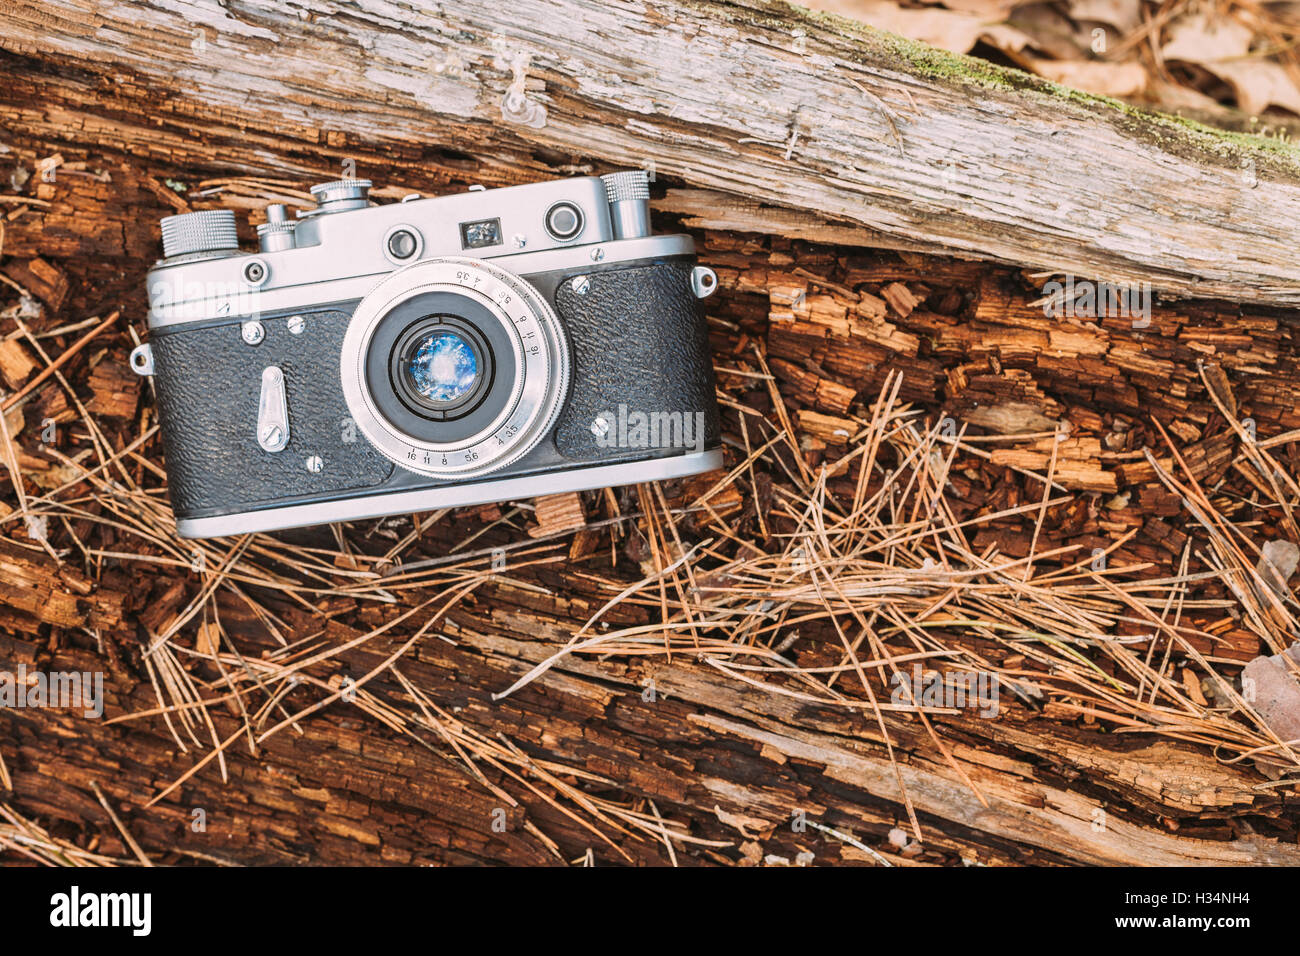 35mm Vintage Old Retro Rangefinder Camera On Old Fallen Wood Tree In Forest. Stock Photo